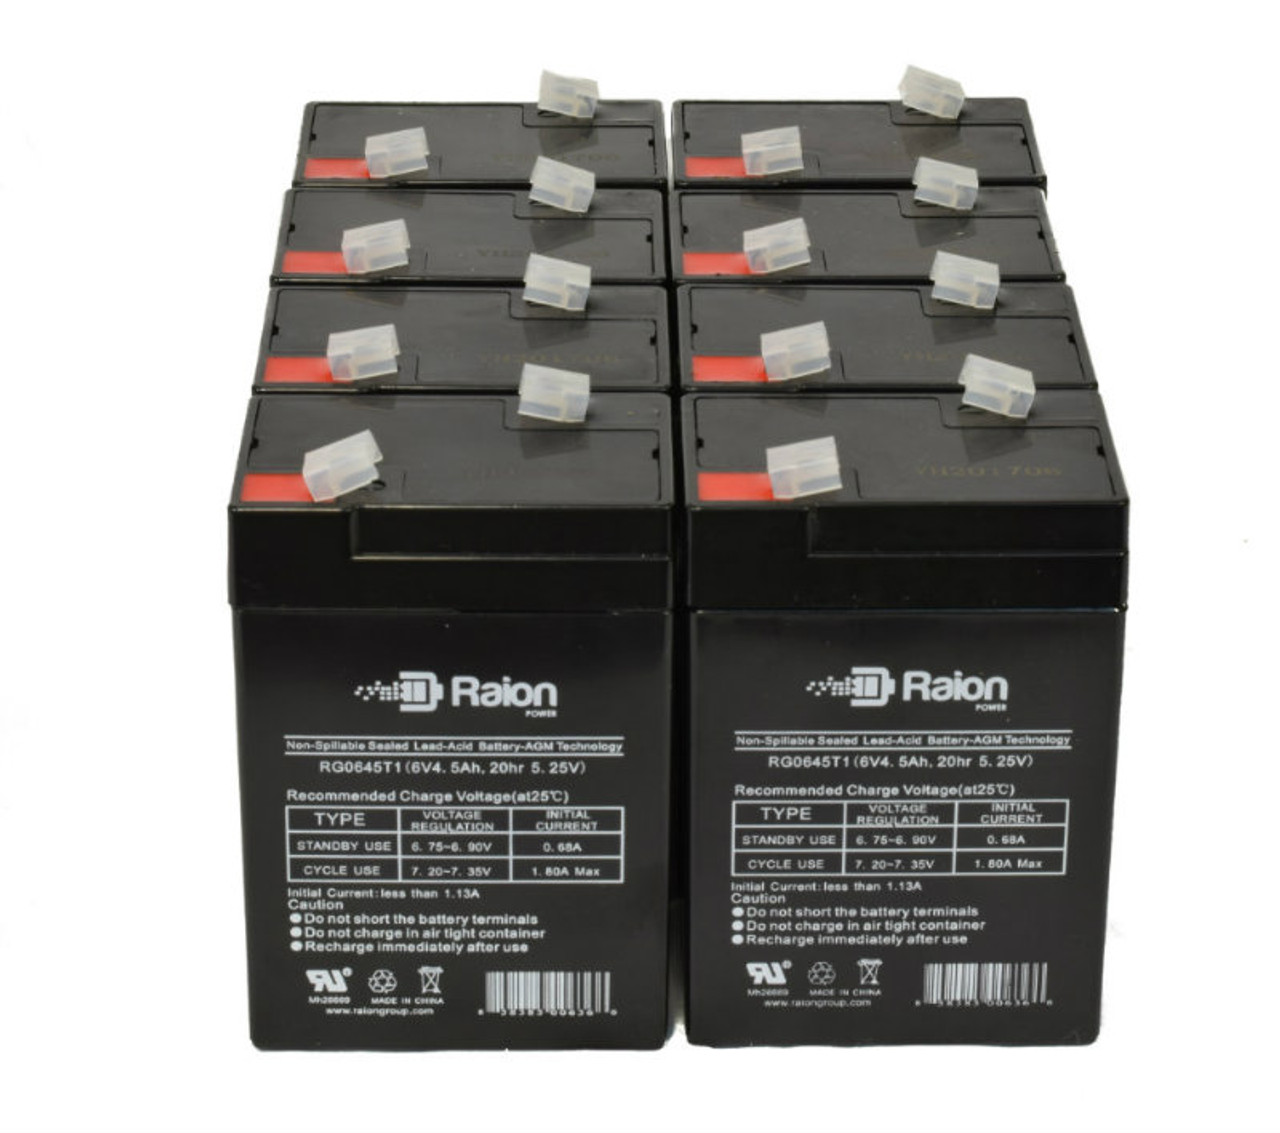 Raion Power 6V 4.5Ah Replacement Emergency Light Battery for Teledyne SQ6S5 - 8 Pack